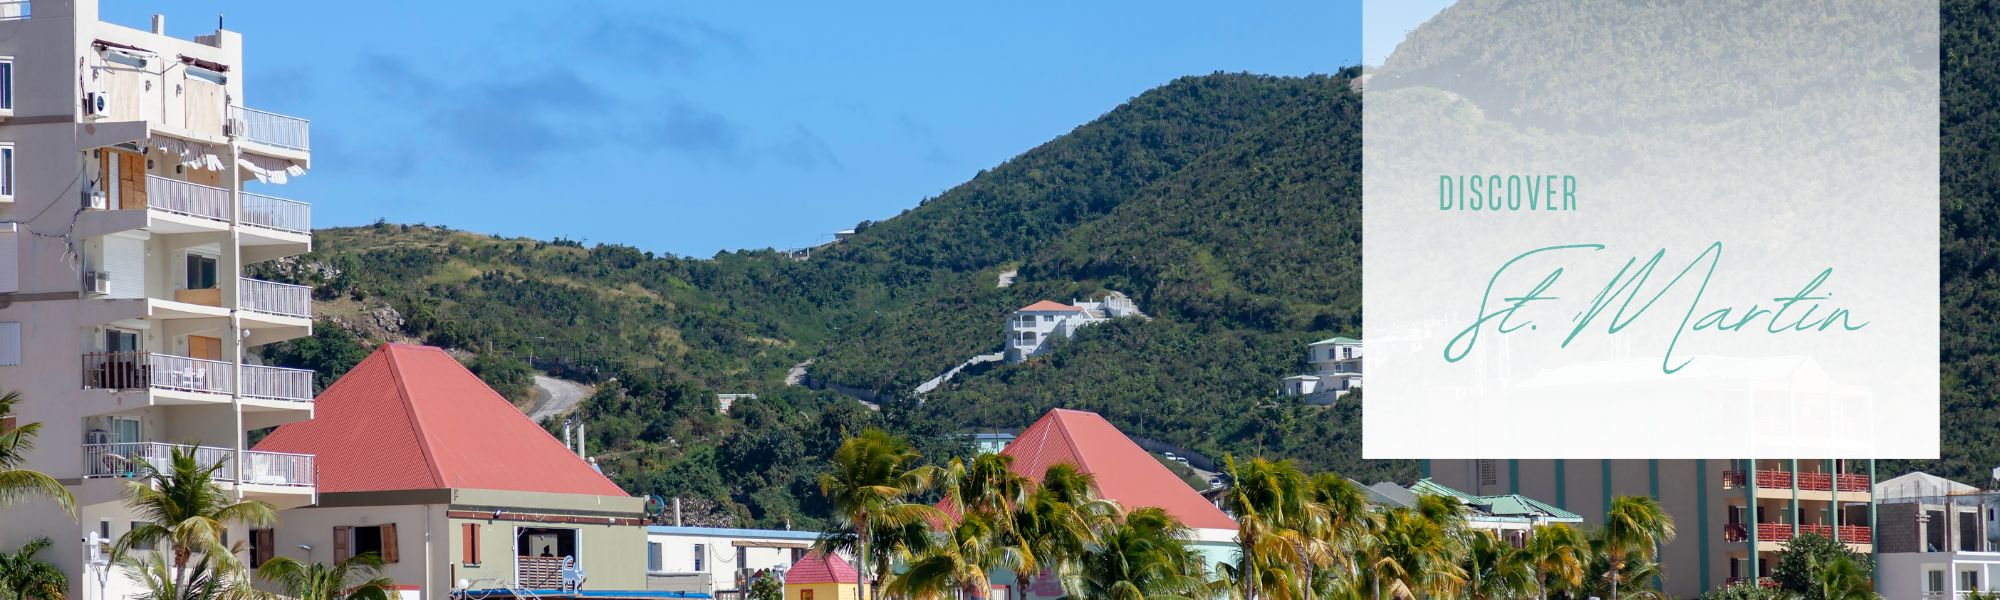 discover St. Martin